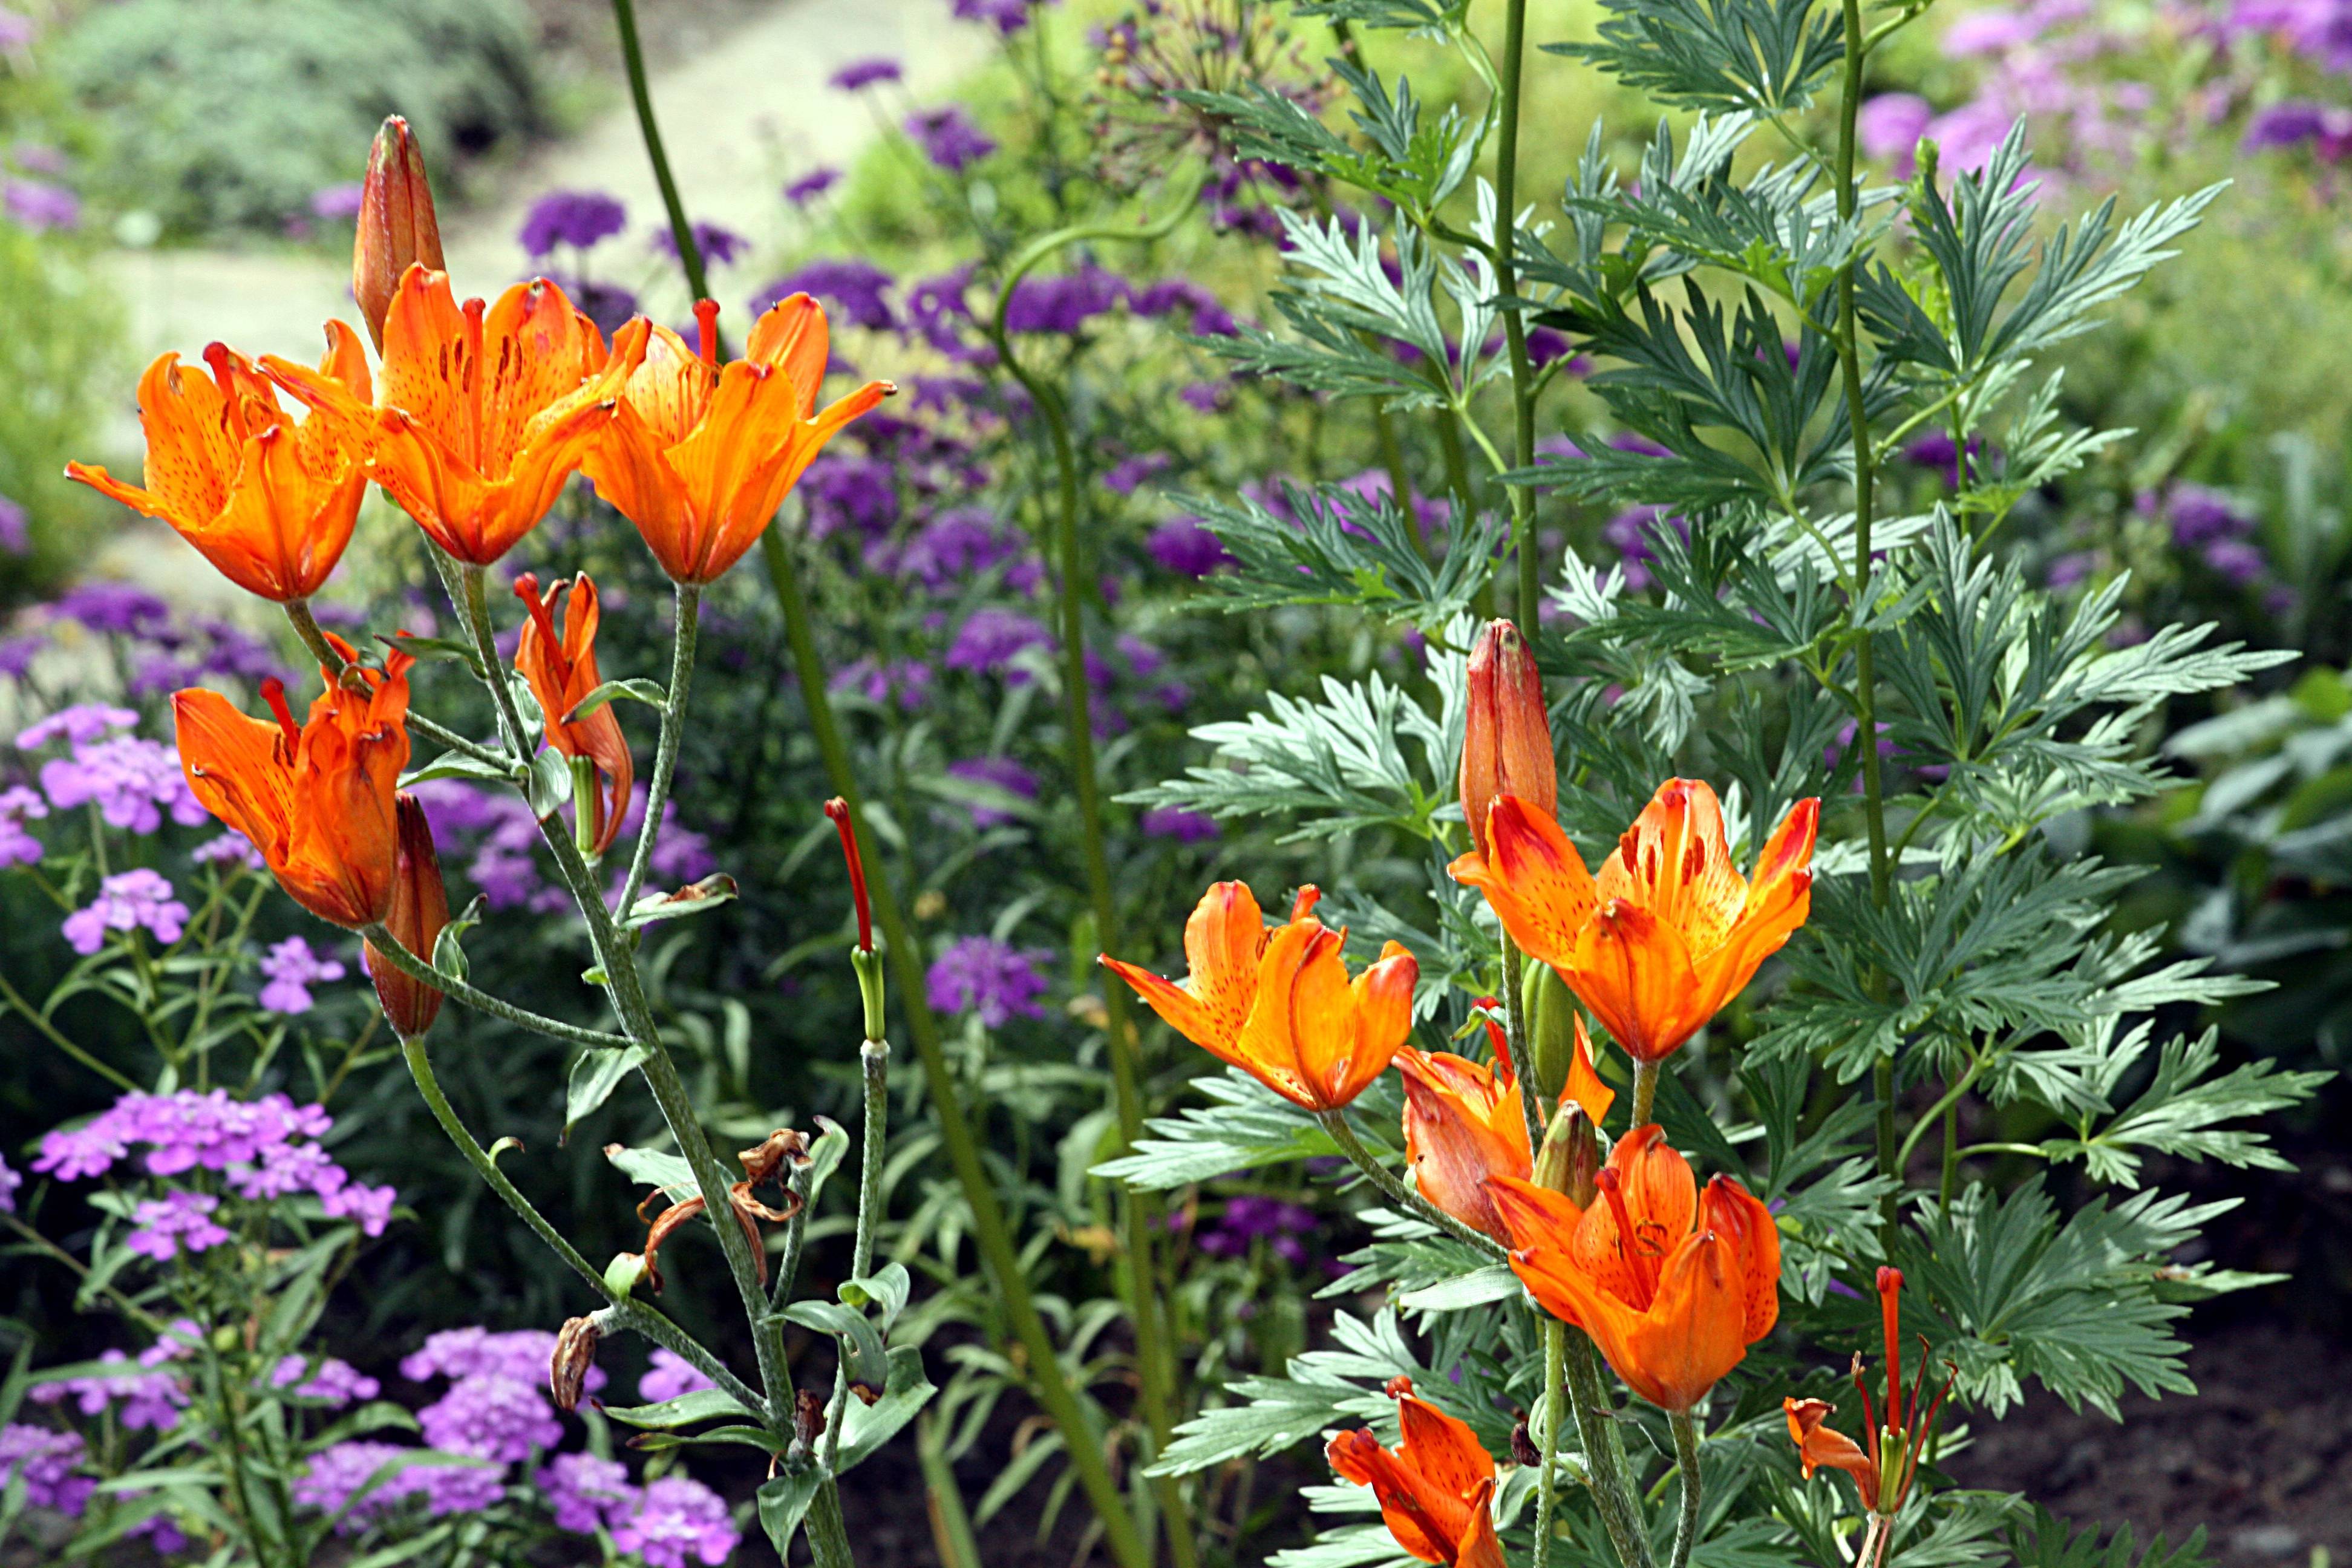 orange flowers with green leaves and stems
